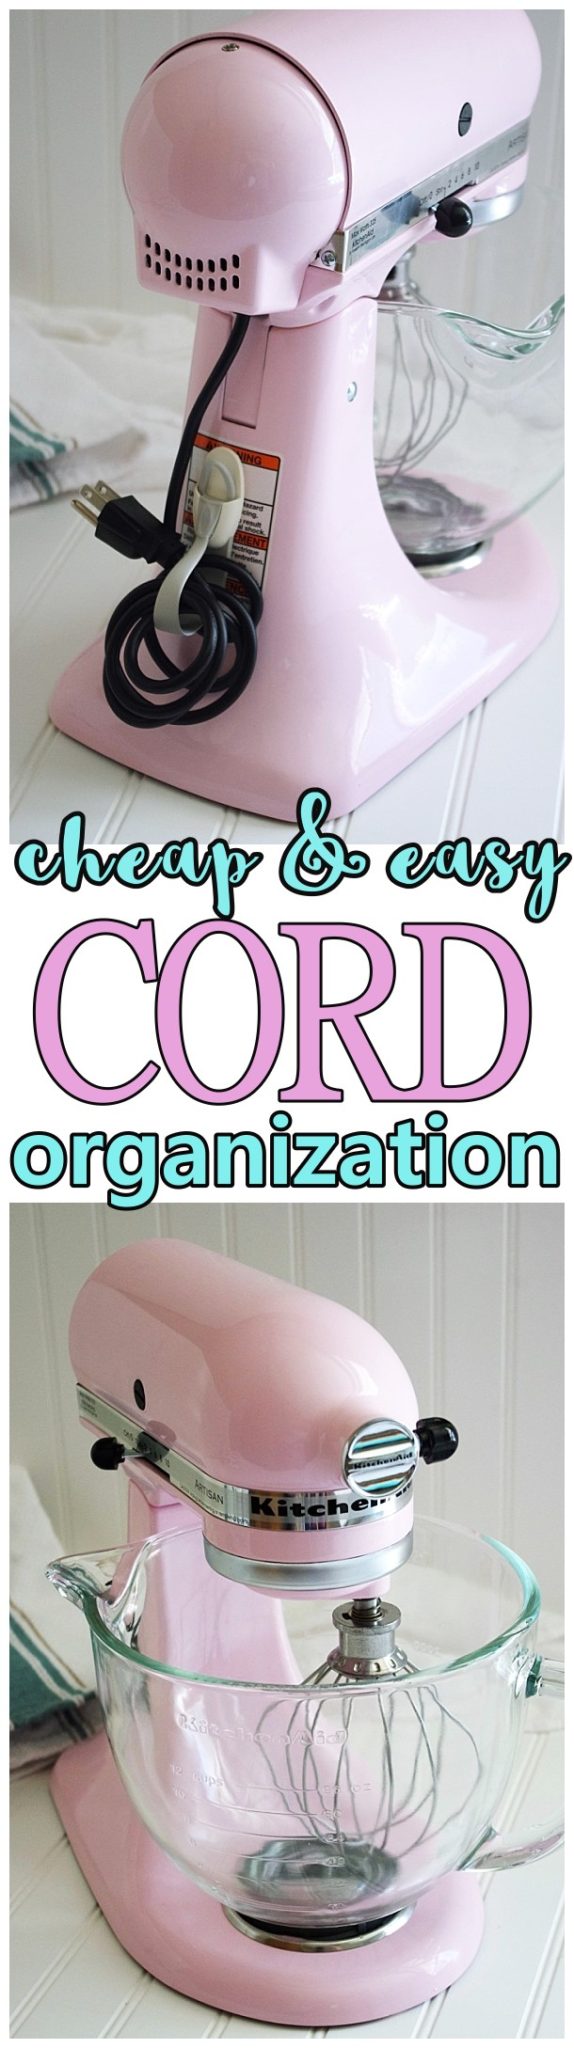 Easy and Cheap Cord Bundler Organization Hack for Small Appliances To Keep Cords Neatly on the appliance itself